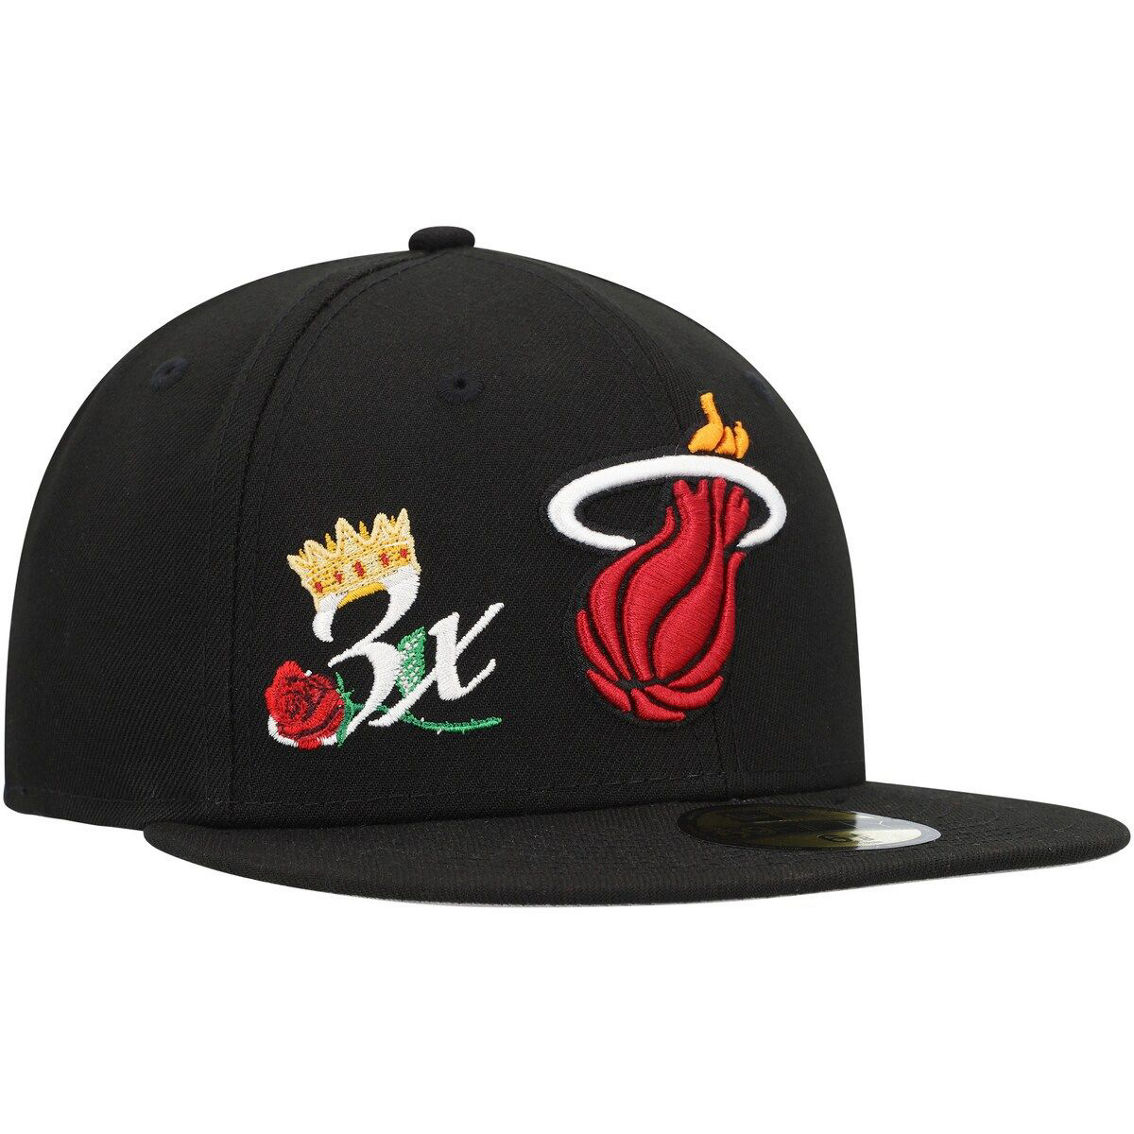 New Era Men's Black Miami Heat Crown Champs 59FIFTY Fitted Hat - Image 2 of 4